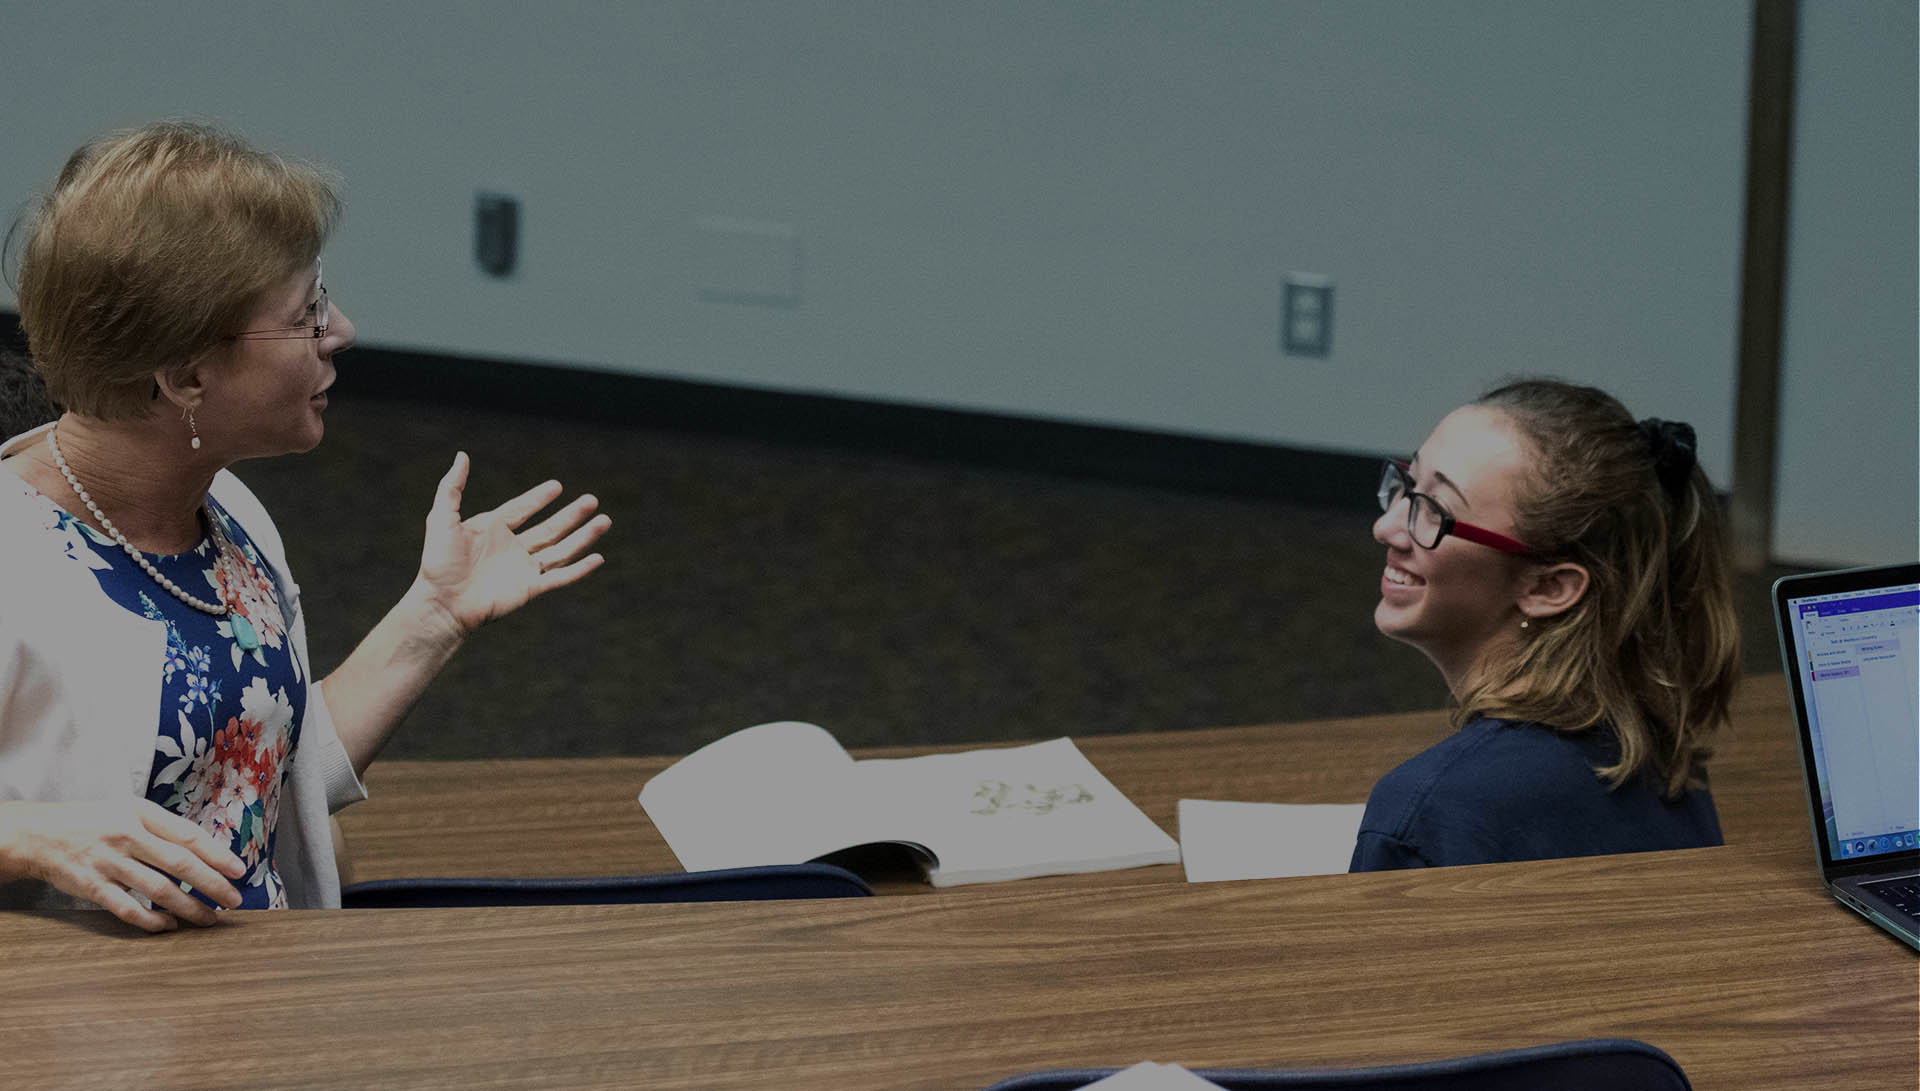 Professor with student speaking together in classroom